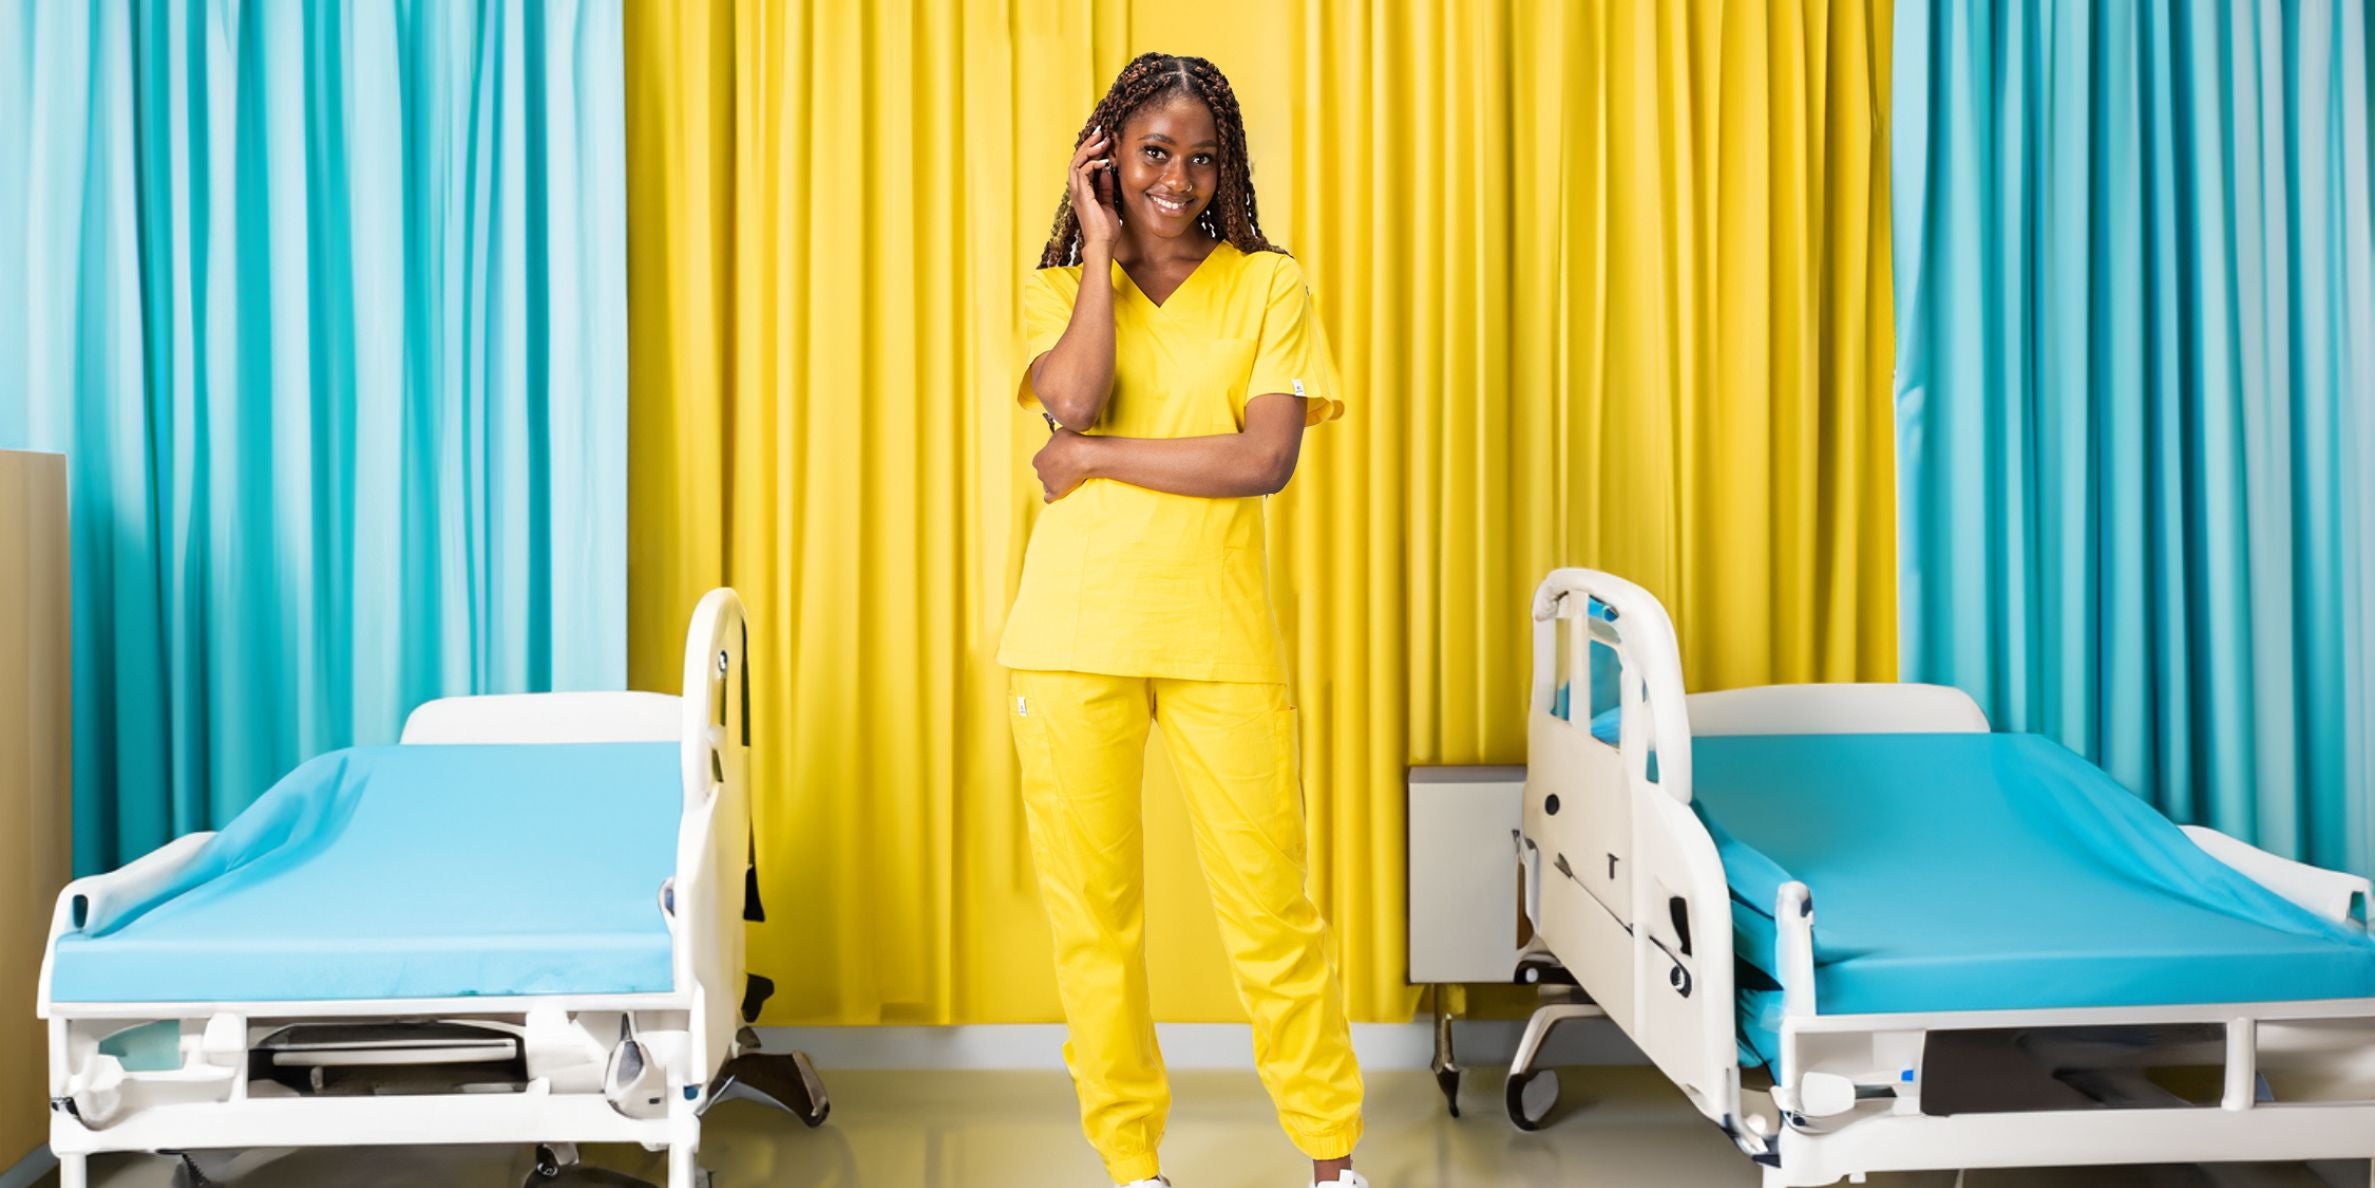 Buy Premium Medical Scrubs and Healthcare Uniforms for Doctors, Nurses, and other Medical Professionals online across South Africa